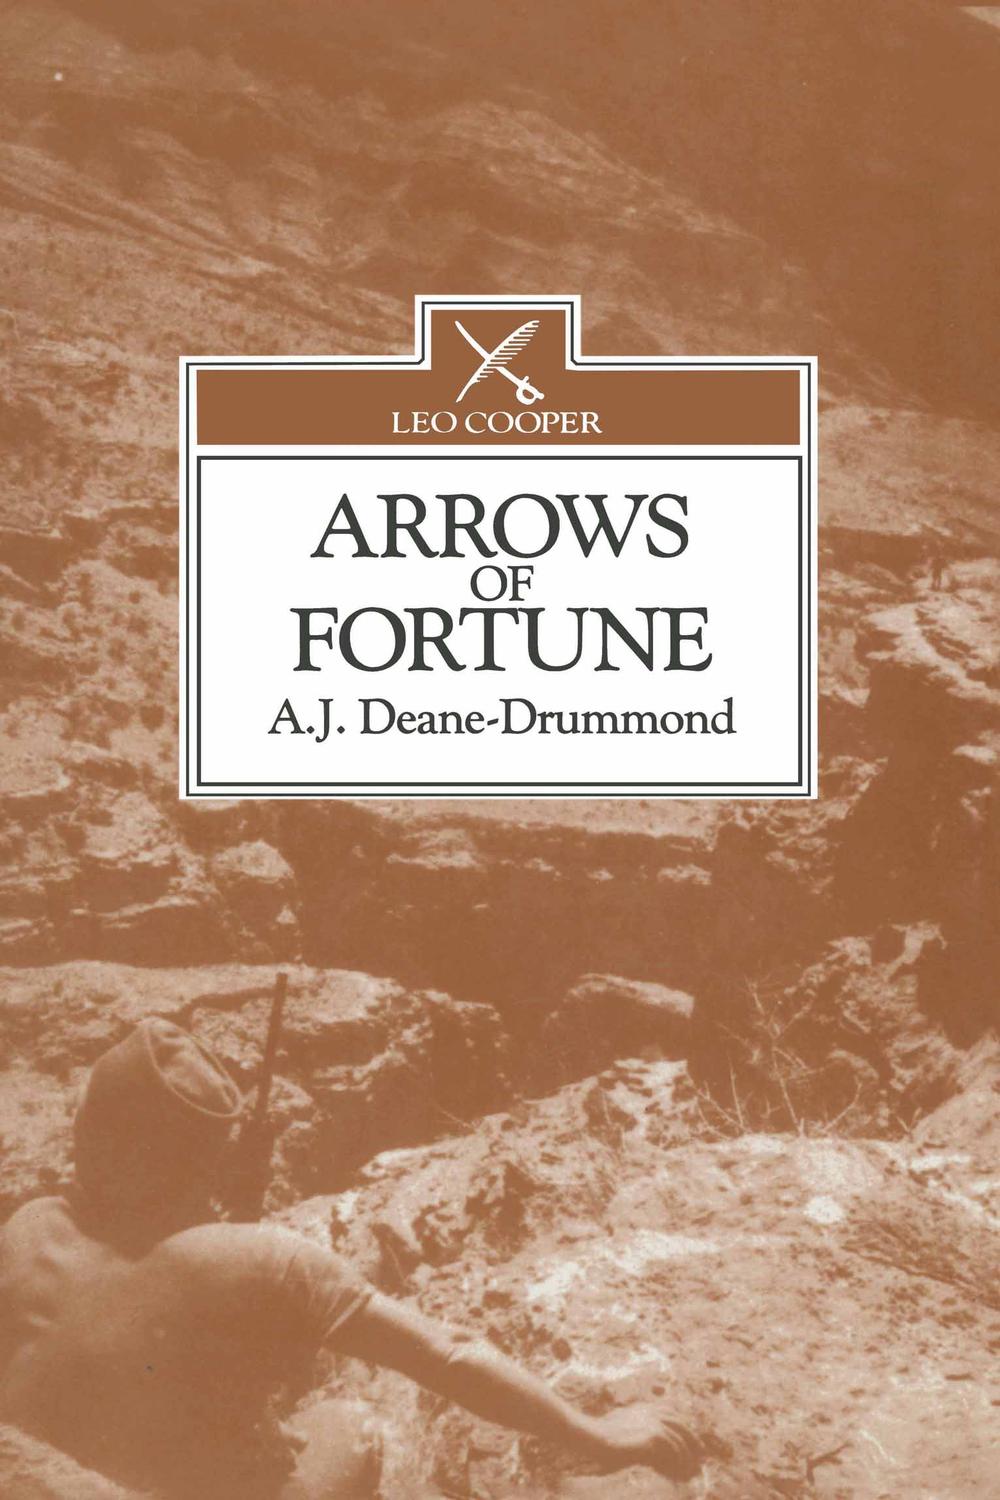 Arrows of Fortune - A. J. Deane-Drummond